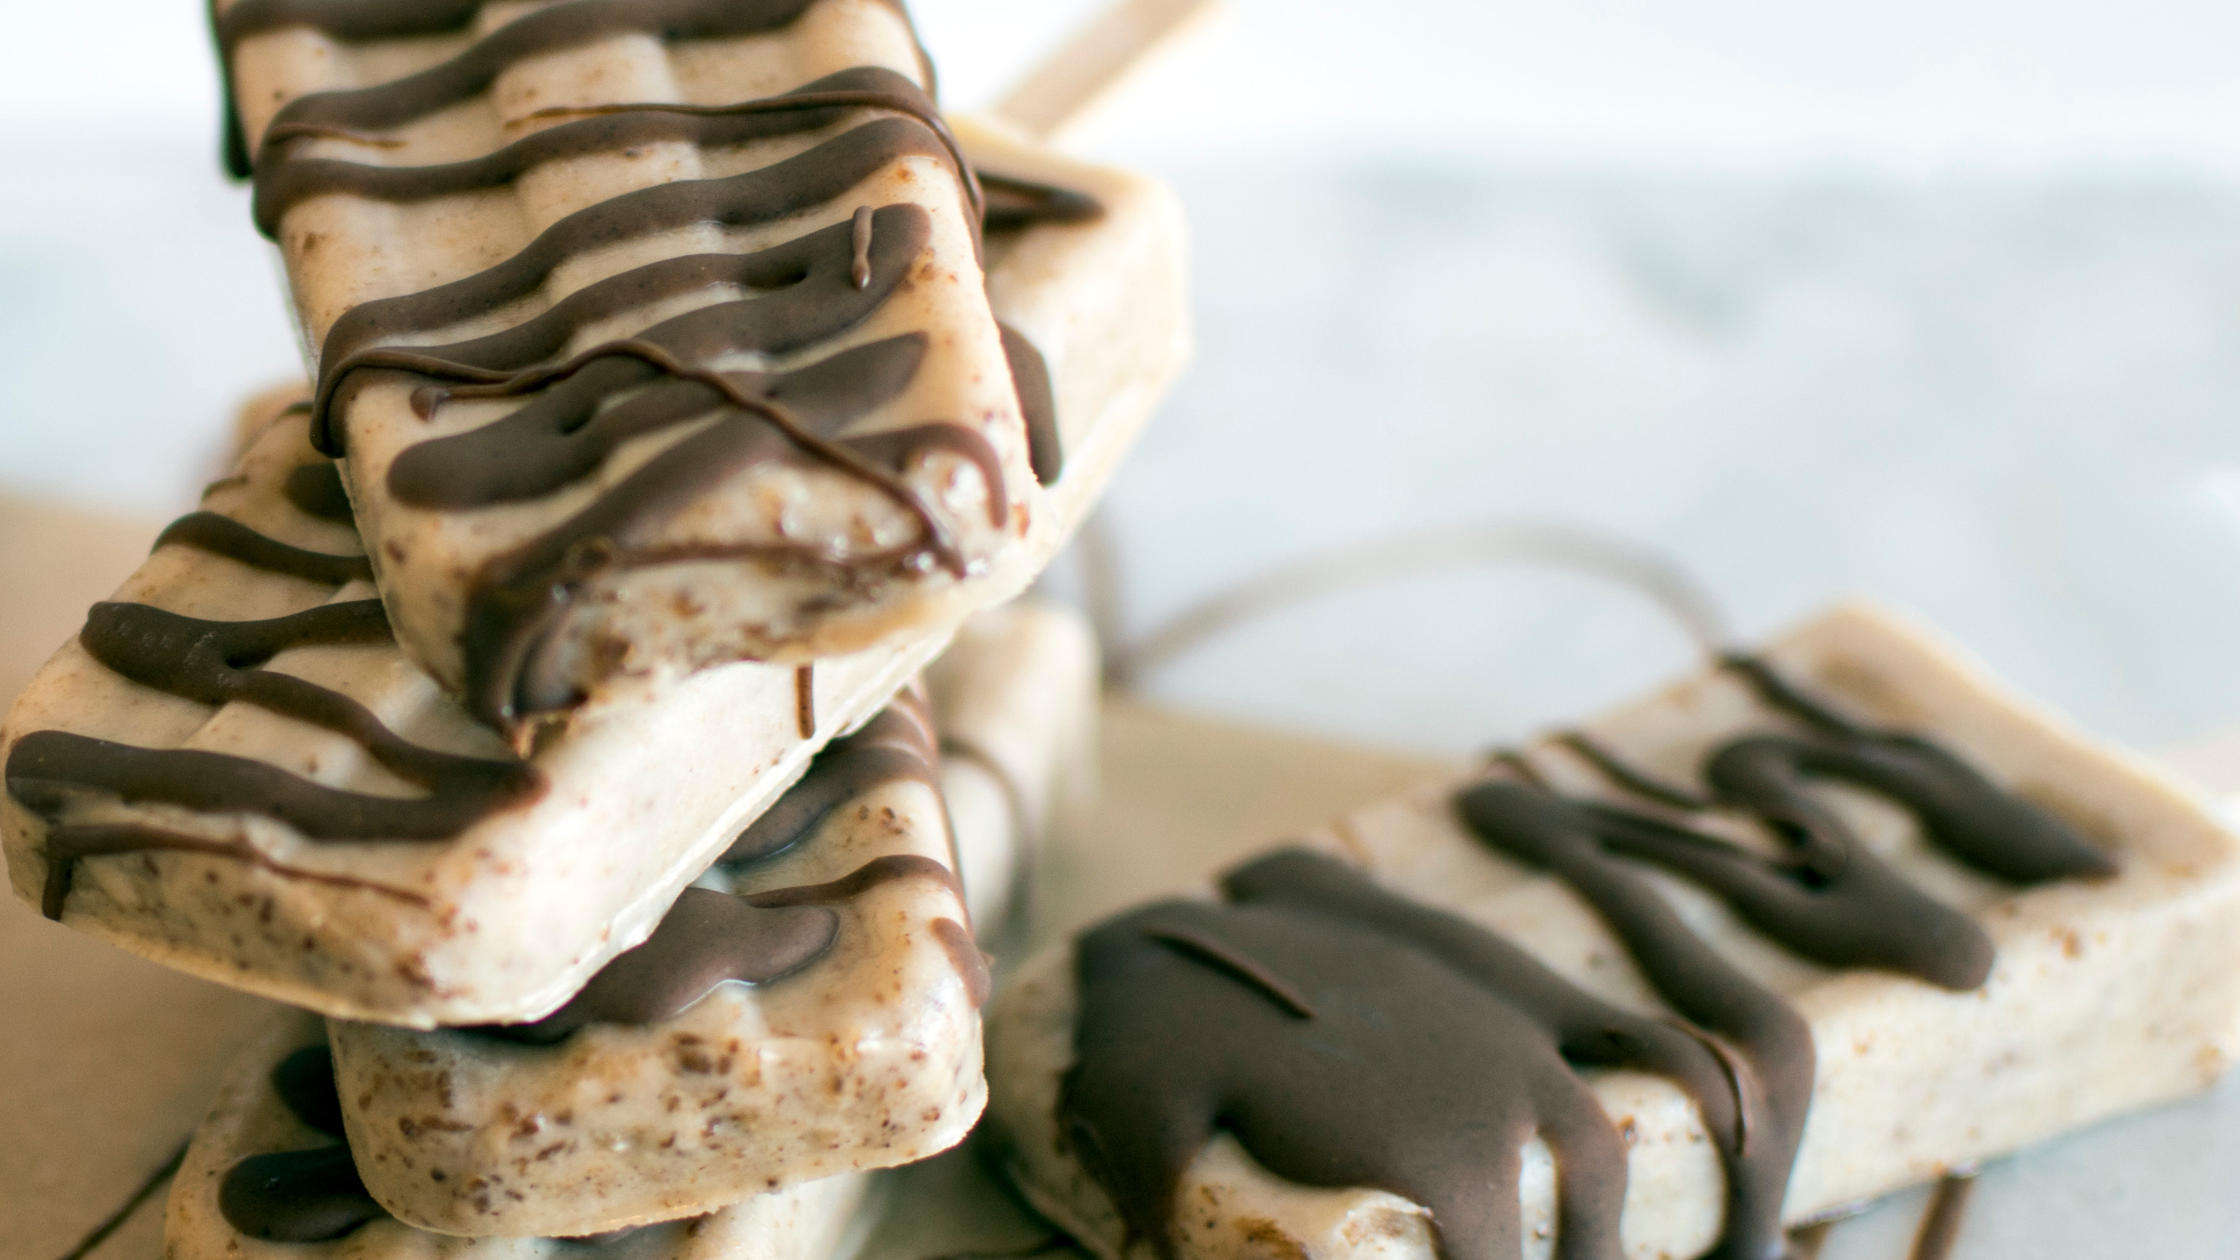 Homemade ice cream pops with nut butter drizzle.